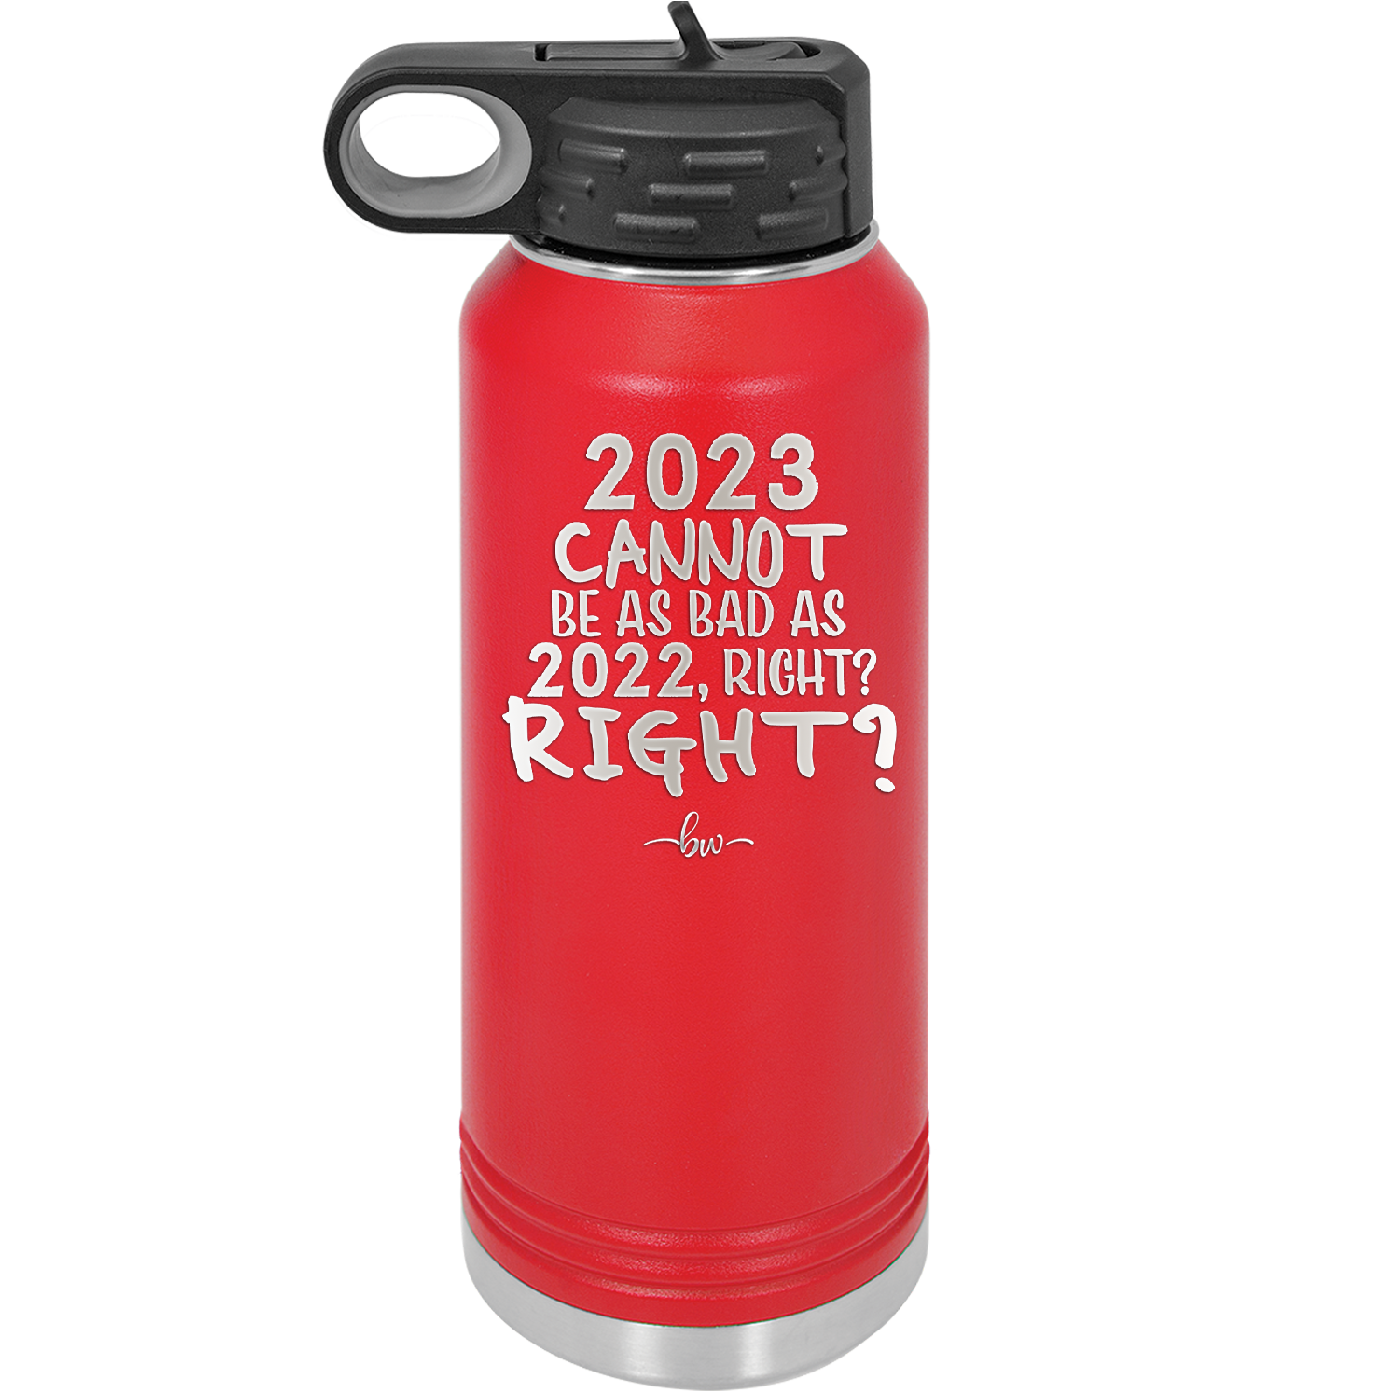 32 oz water bottle 2023 cannot be as bas as 2022, right?right? -  red